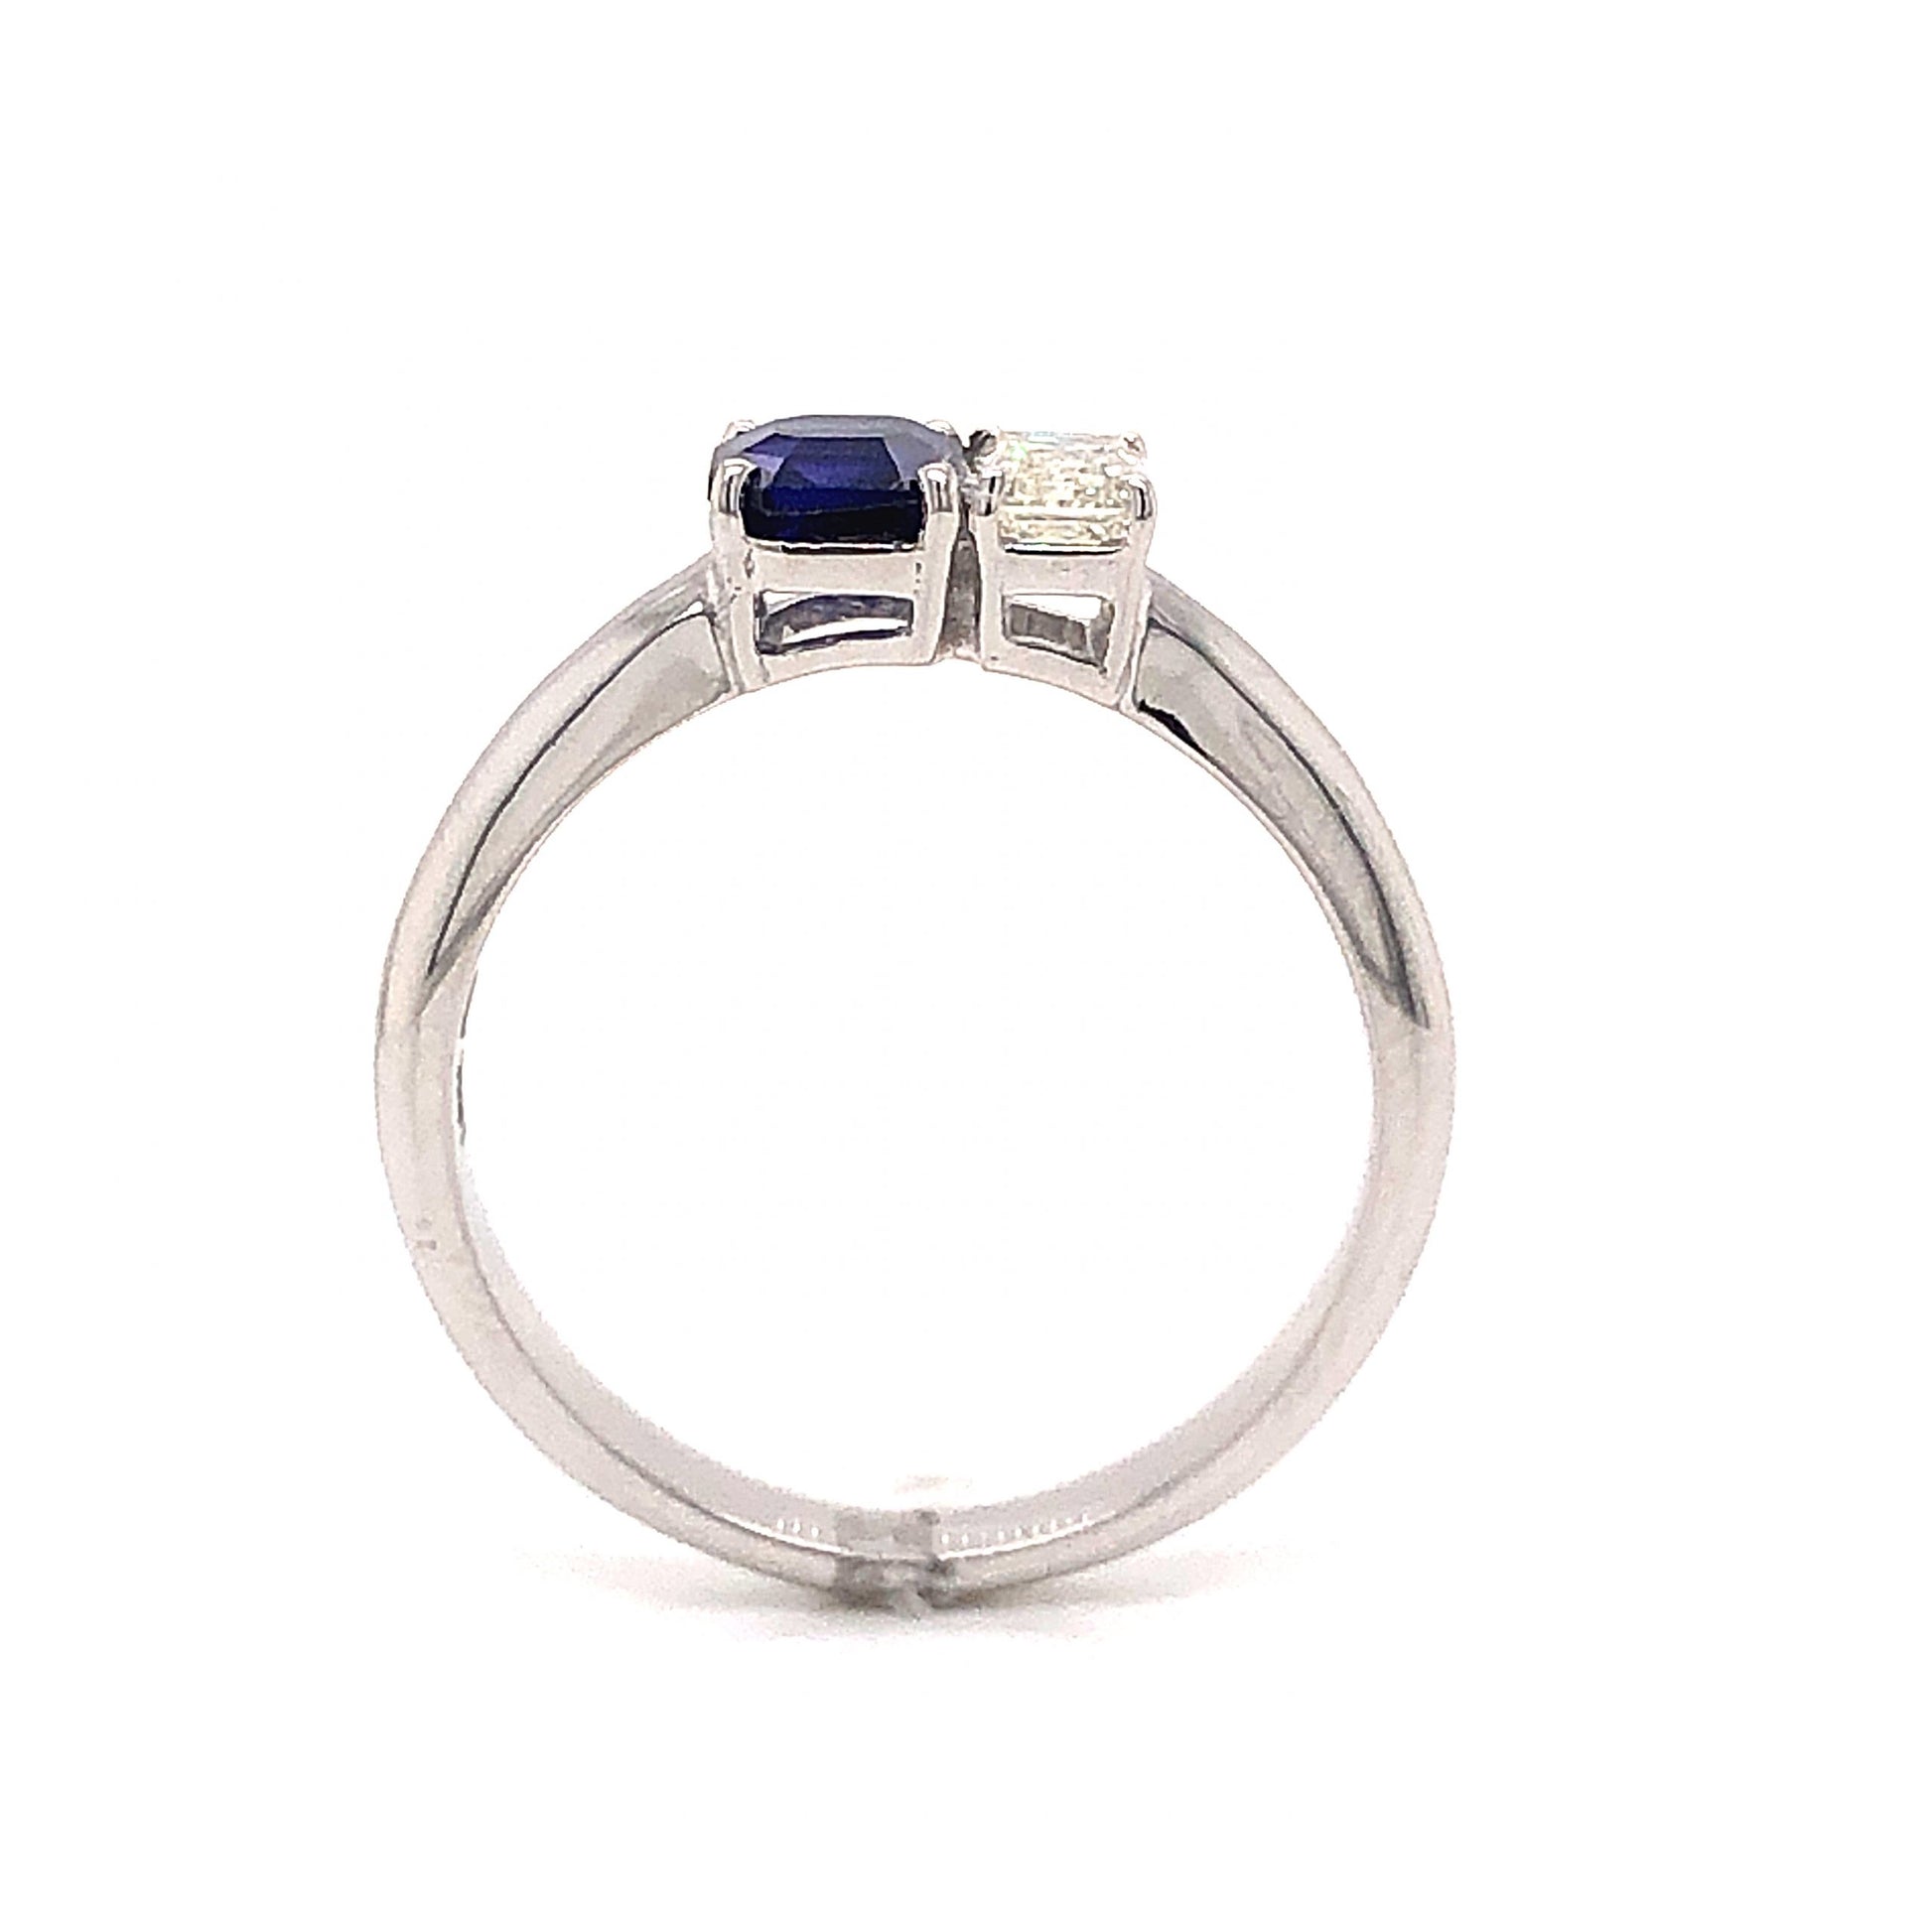 Two Stone Sapphire & Diamond Ring in 18k White GoldComposition: 18 Karat White Gold Ring Size: 6.75 Total Diamond Weight: .31ct Total Gram Weight: 3.8 g Inscription: 18k
      